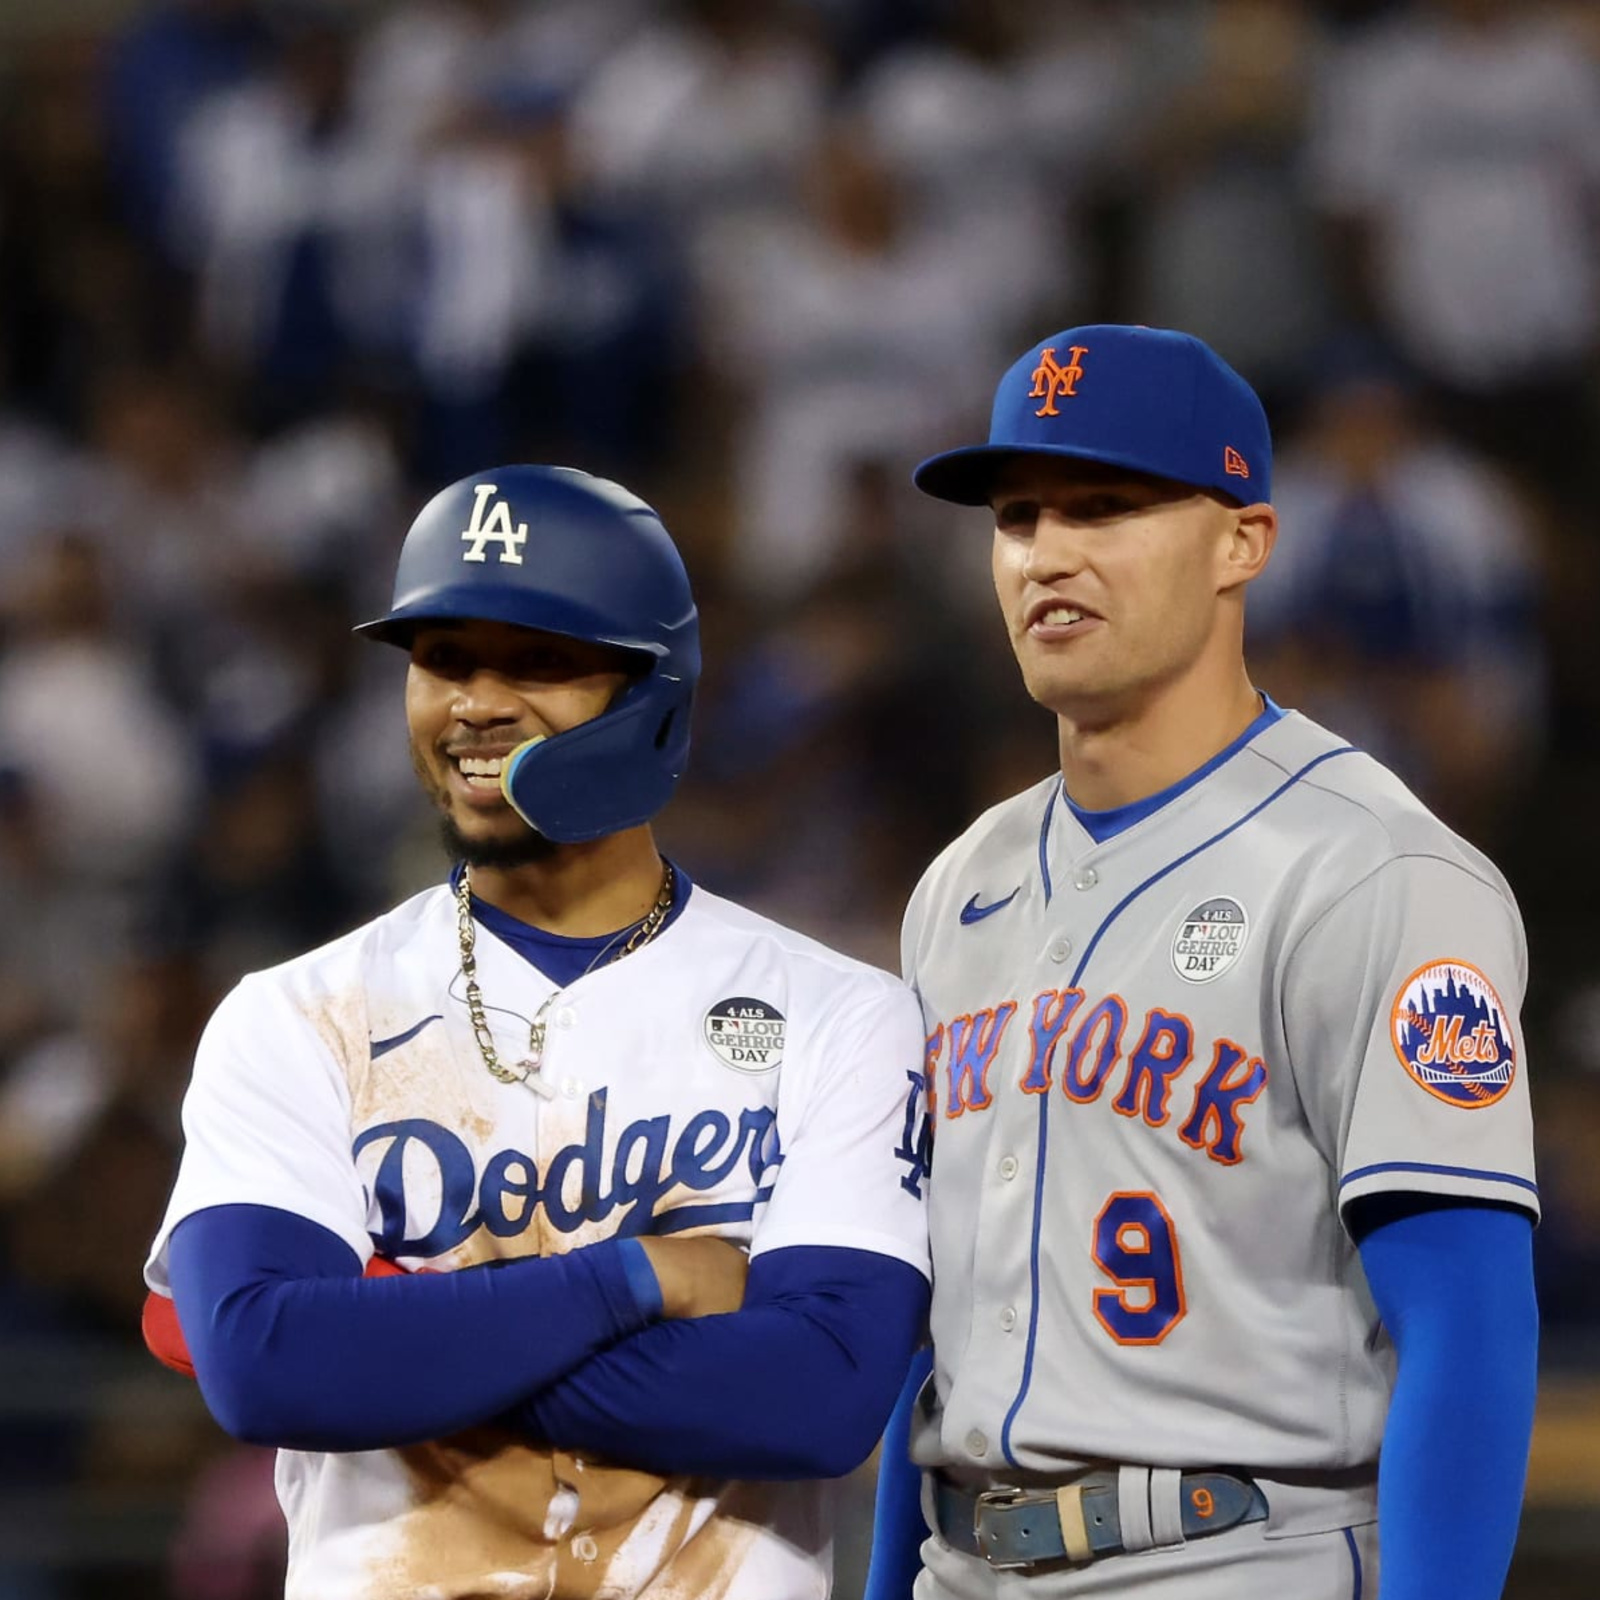 Dodgers vs. New York Mets: How to watch, start times, odds - Los